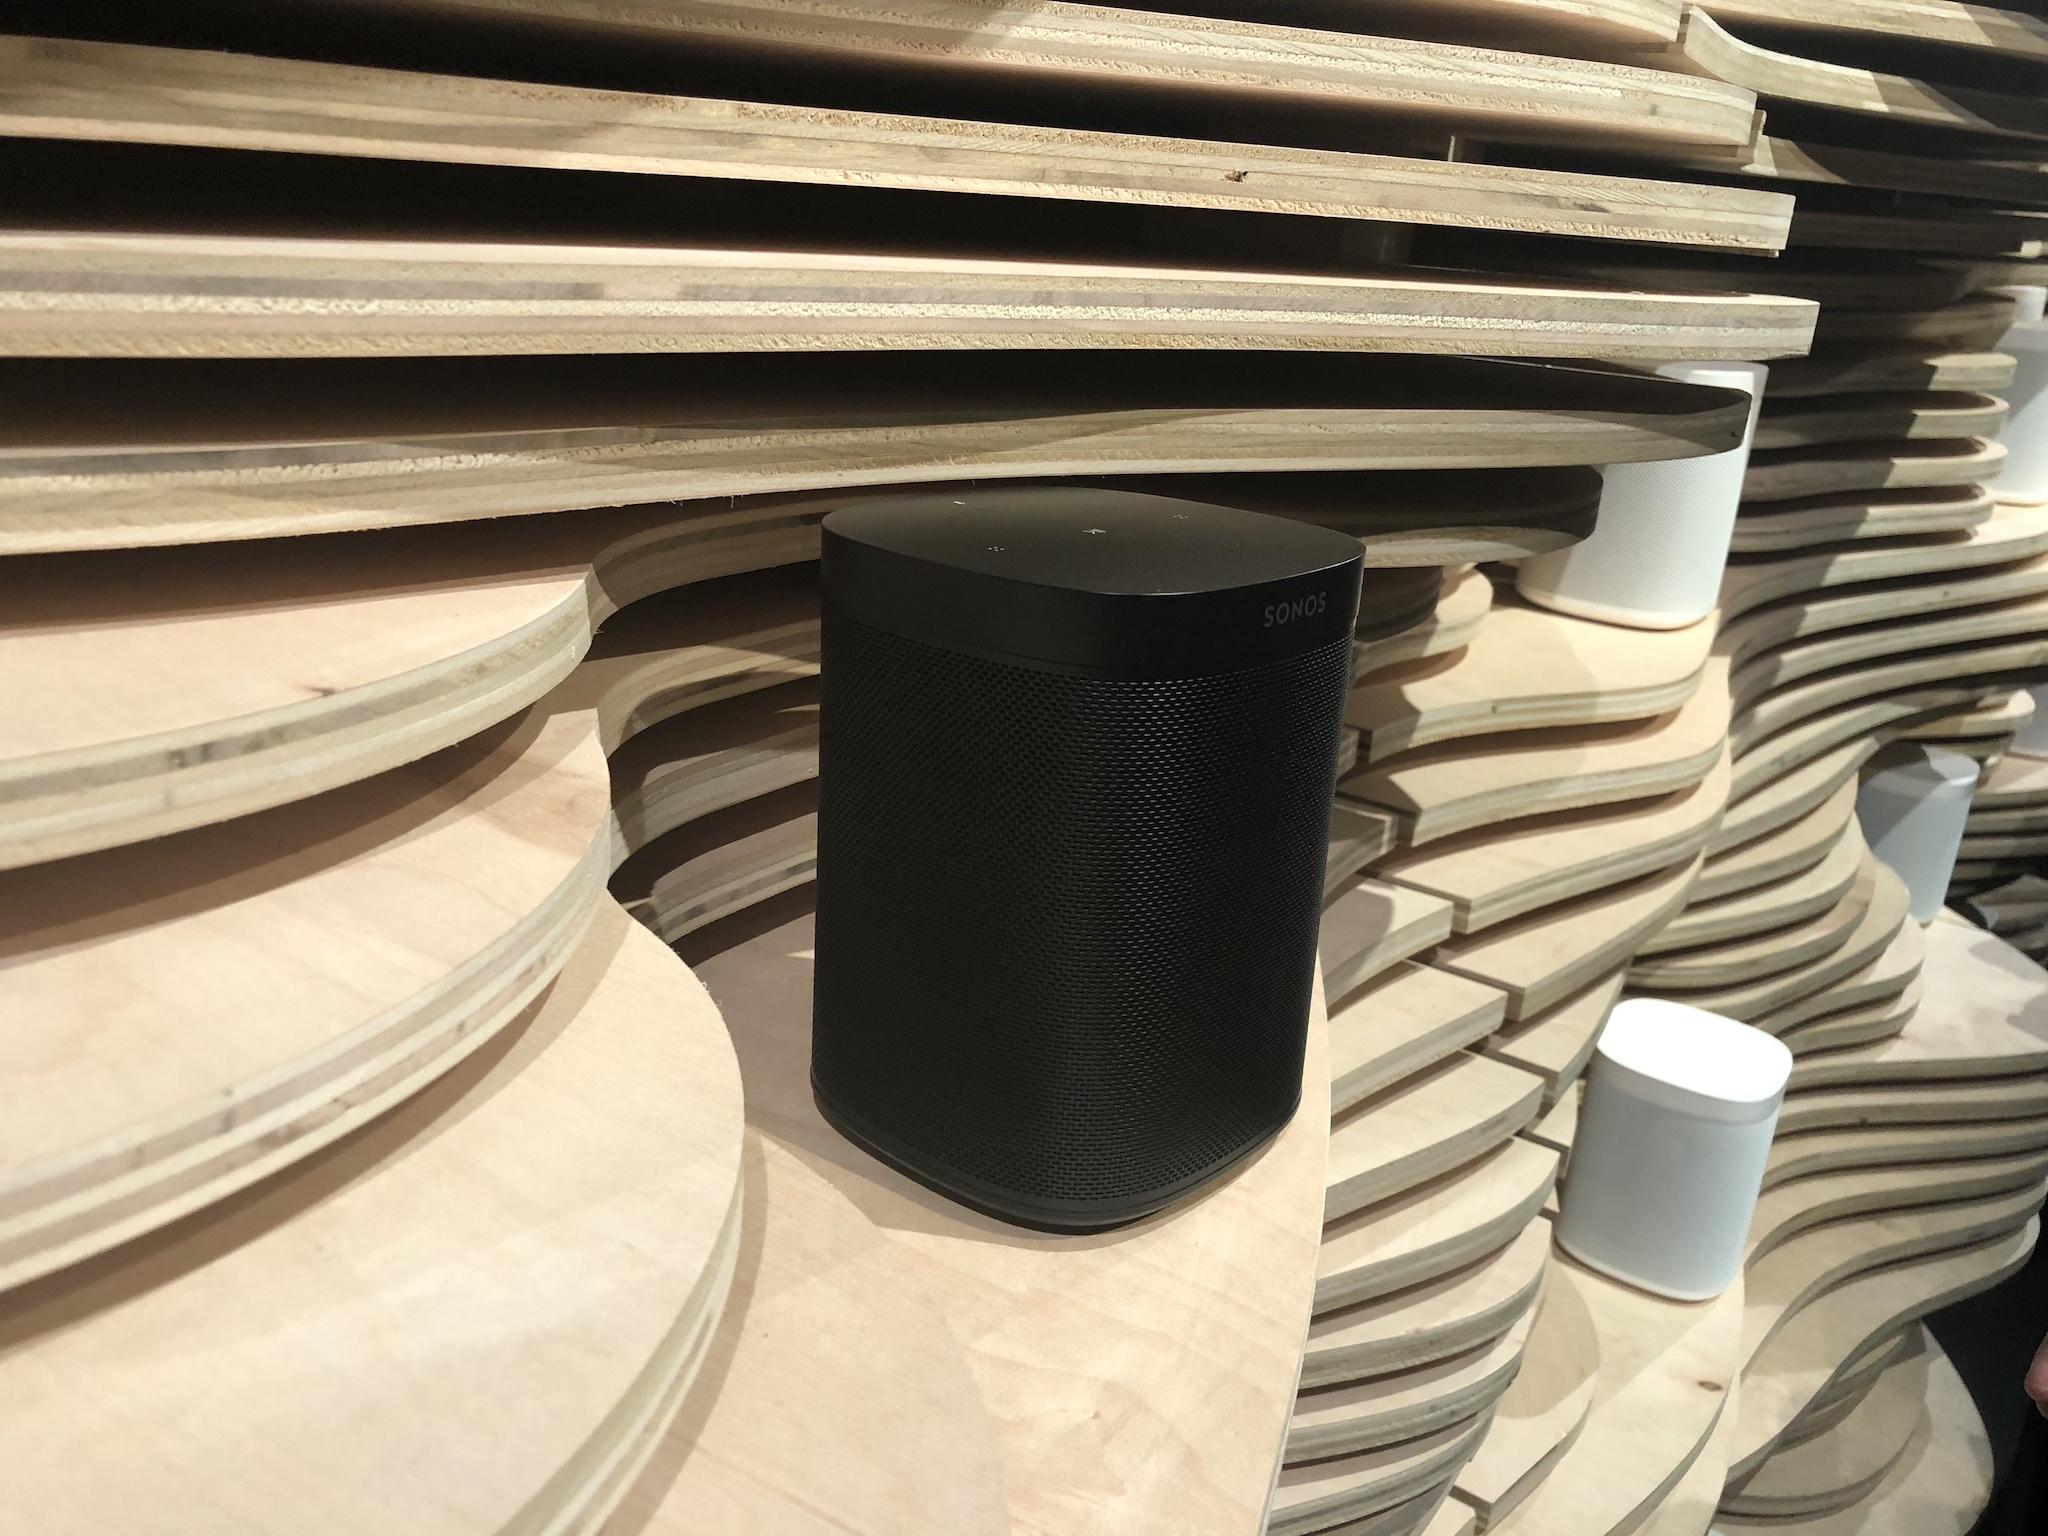 The Sonos One at its launch event